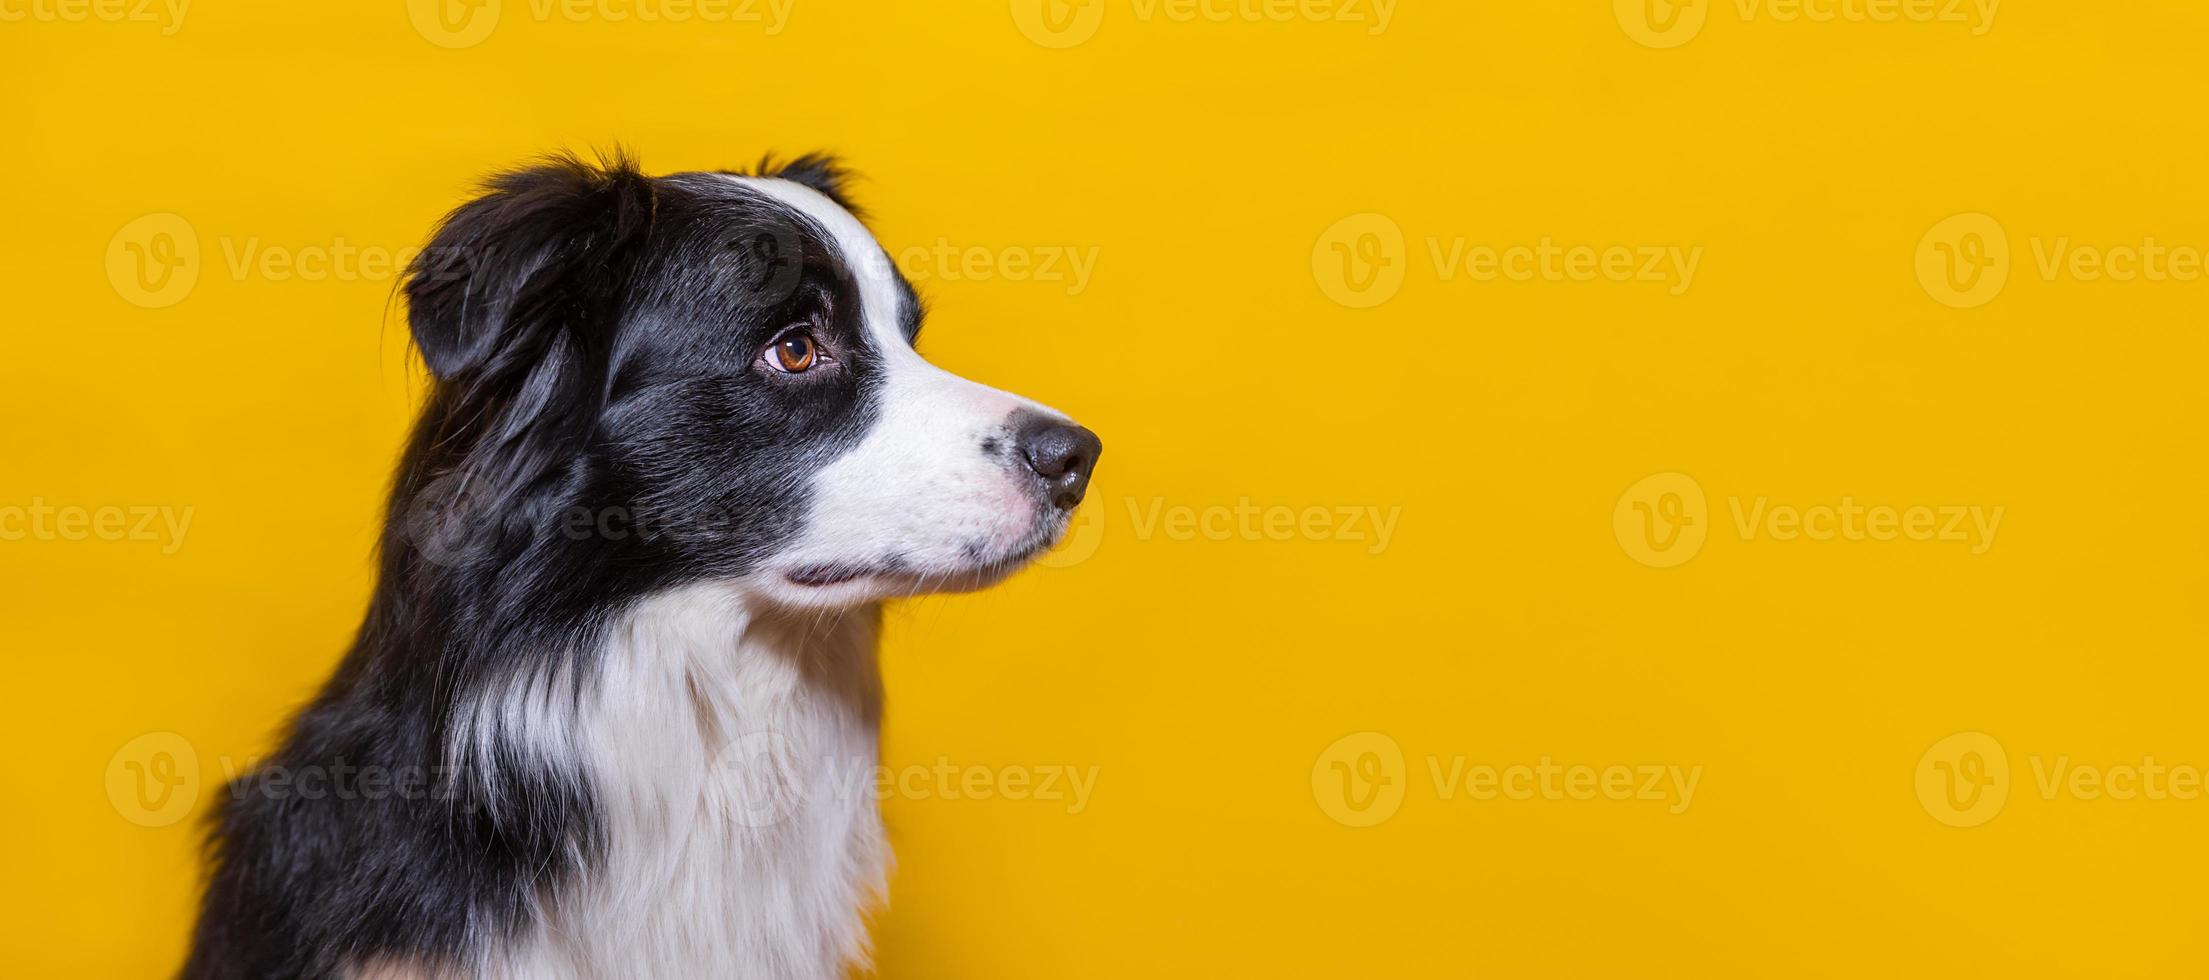 Funny portrait of cute puppy dog border collie isolated on yellow colorful background. Cute pet dog. Pet animal life concept. Banner, copy space photo